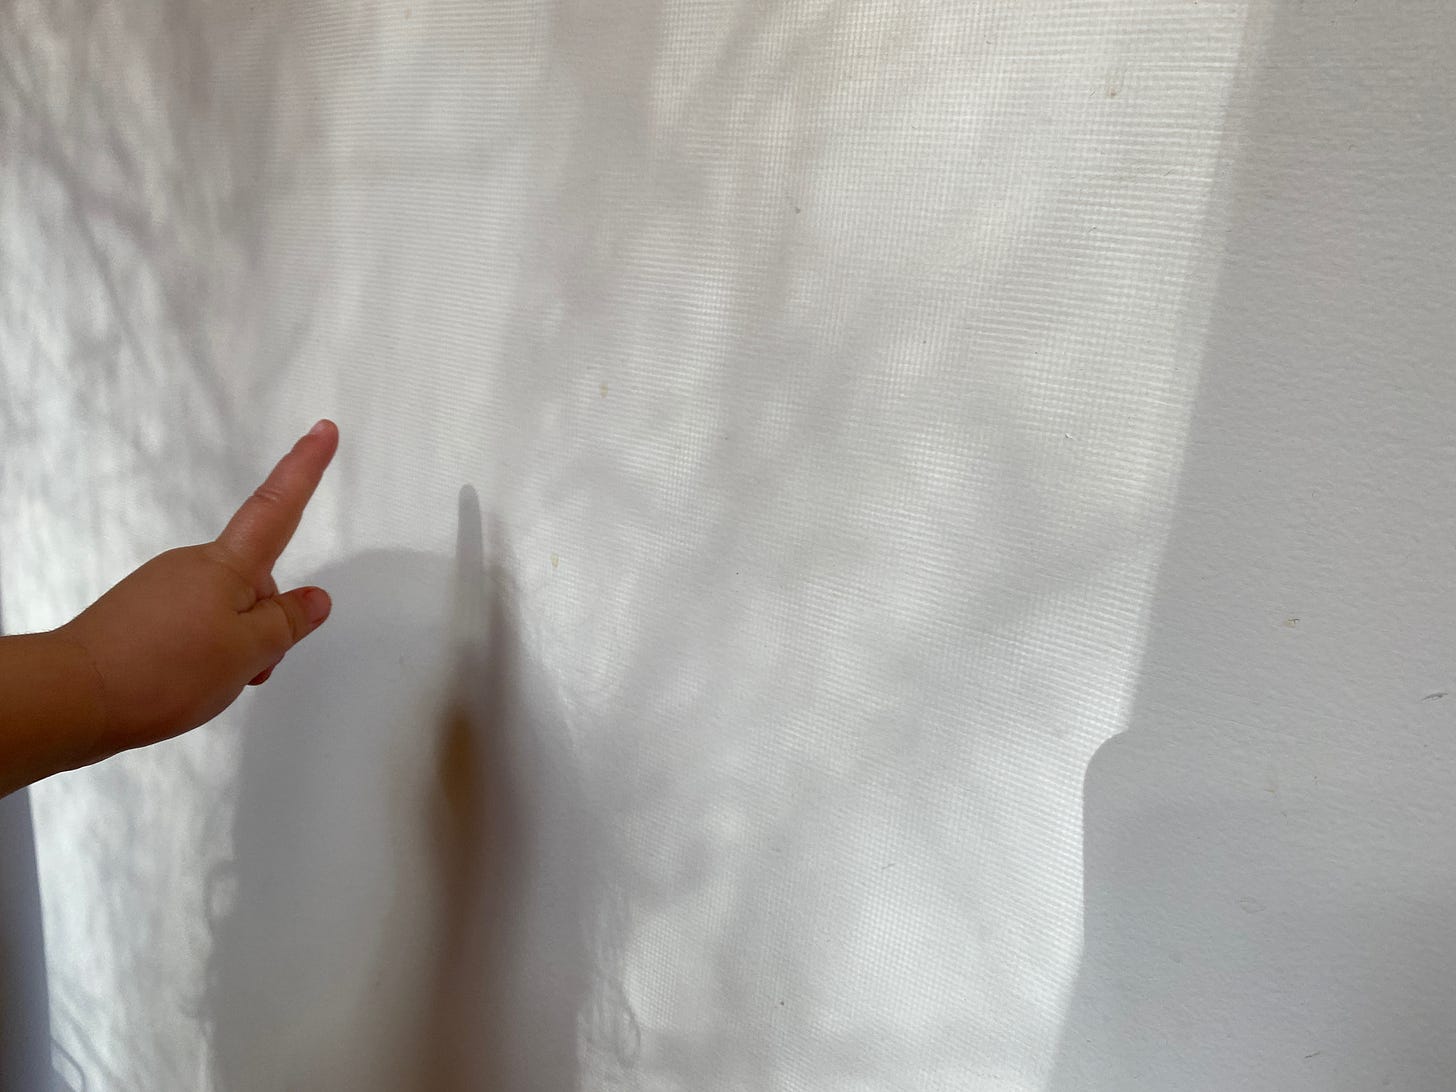 A white wall with shadows of tree branches on it. In the foreground a small hand of a toddler, points to the shapes on the wall.